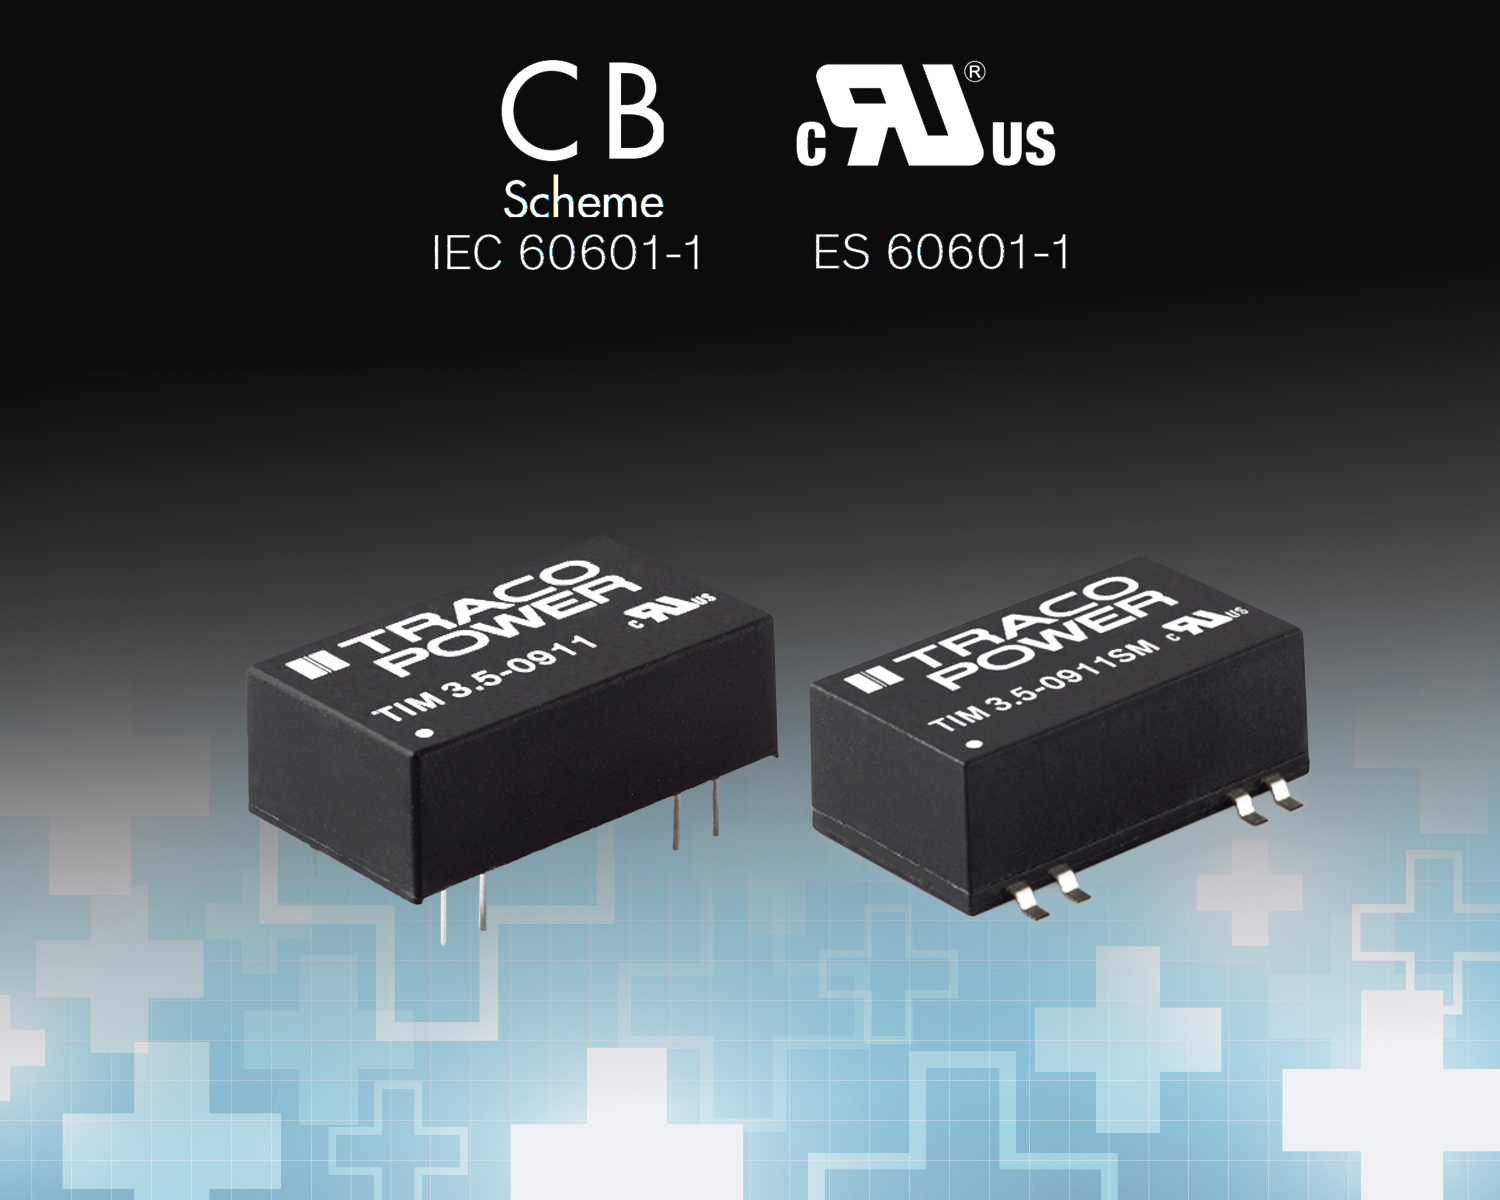 3.5 Watt Medical DC-DC Converters Feature Compact DIP or SMD Package